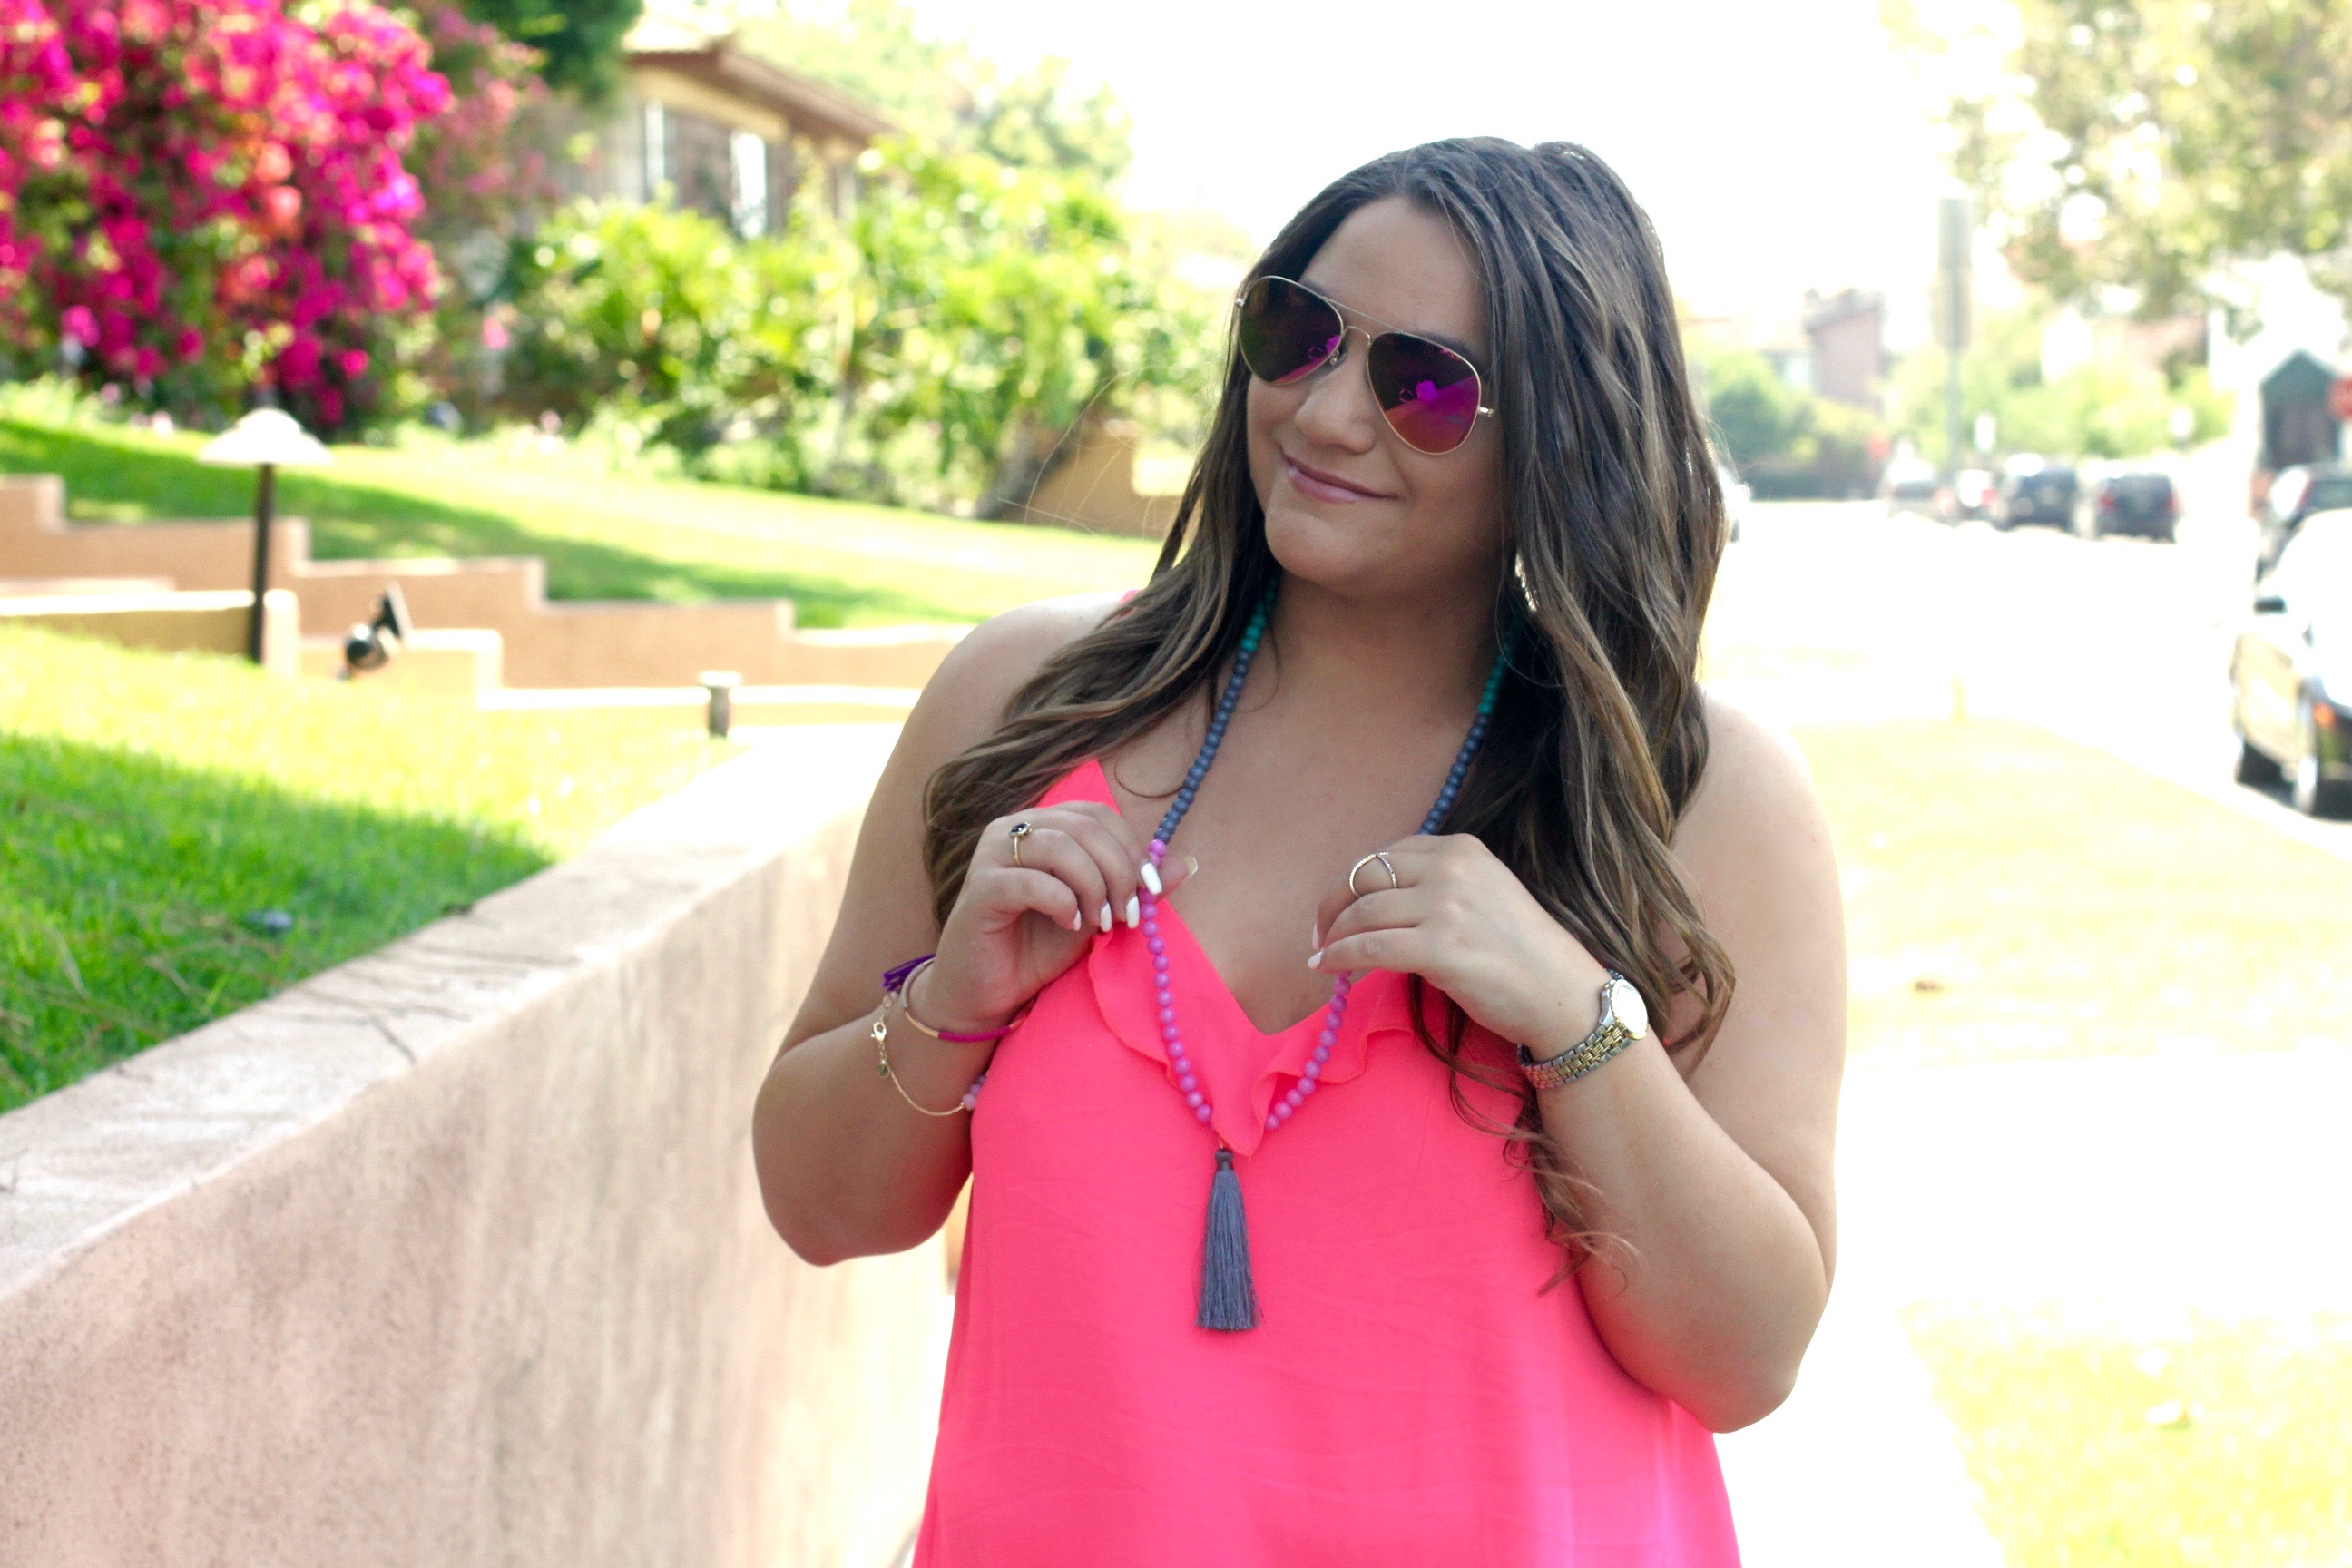 missyonmadison, melissa tierney, la blogger, la style, fashion blogger, style blogger, hot pink camisole, hot pink chiffon camisole, nordstrom rack, nordstrom rack hot pink camisole, old navy, old navy white rockstar jeans, white skinny jeans, how to style neon for summer, how to style white jeans for summer, beaded tassel necklace, shira melody jewelry, nicole lee, nicole lee satchel, white top handle satchel, gray suede pointed toe pumps, gray pumps, summer style, pink mirrored aviators, pink aviators, pink sunglasses,